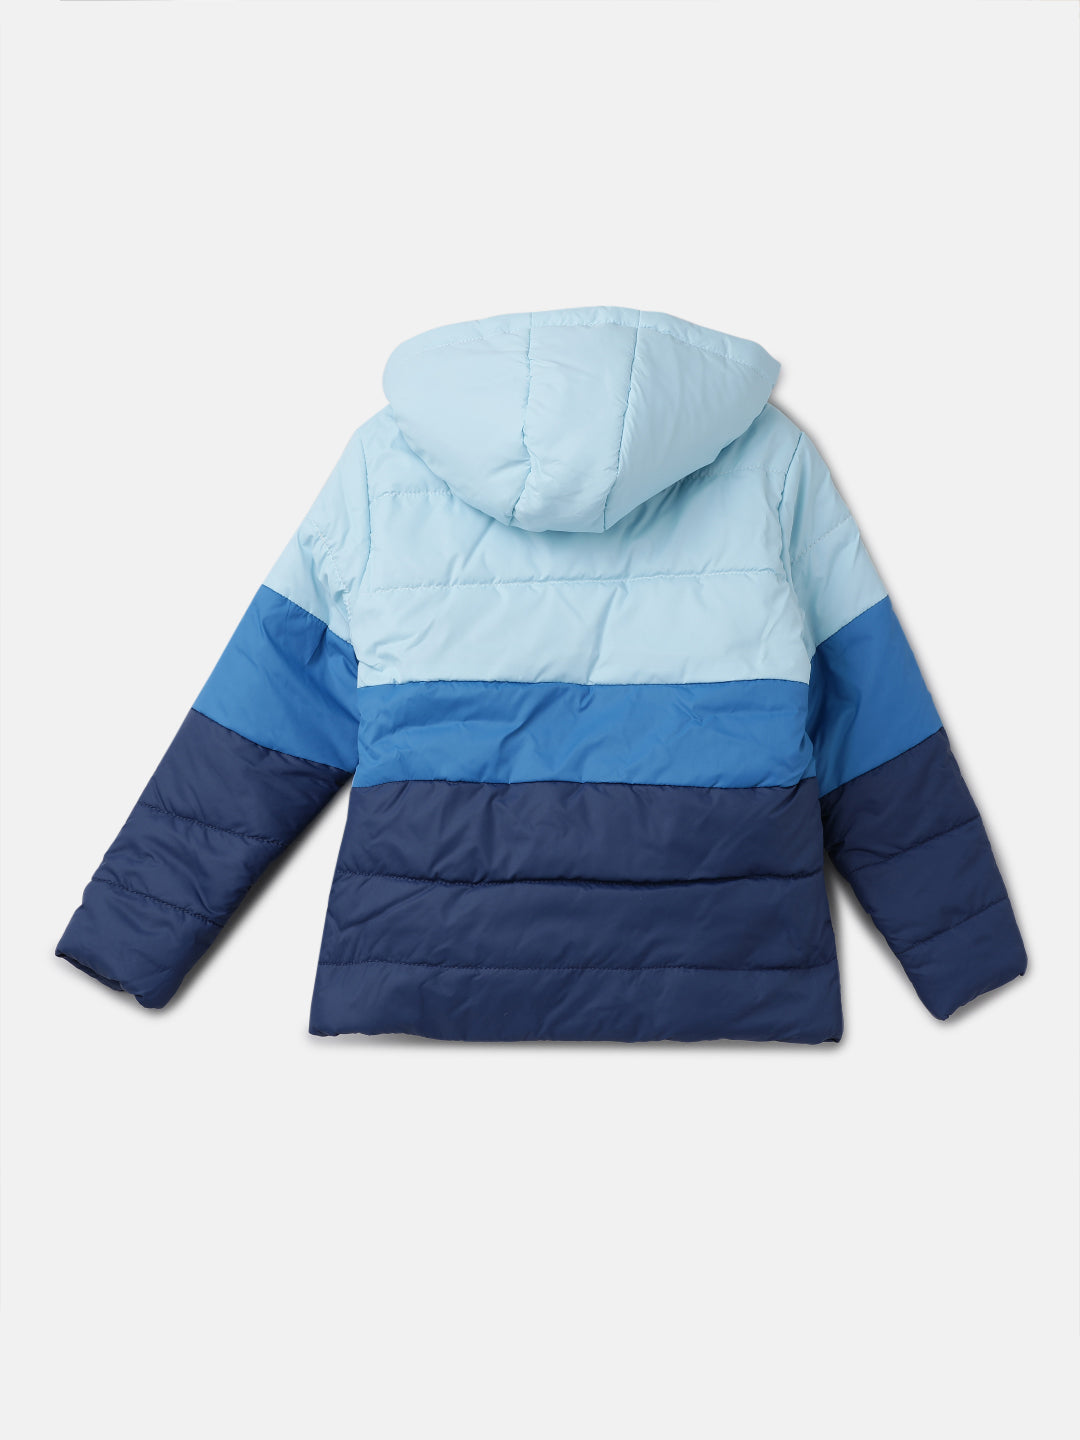 Girls Colour Blocked Puffa Jacket Blue with Hood